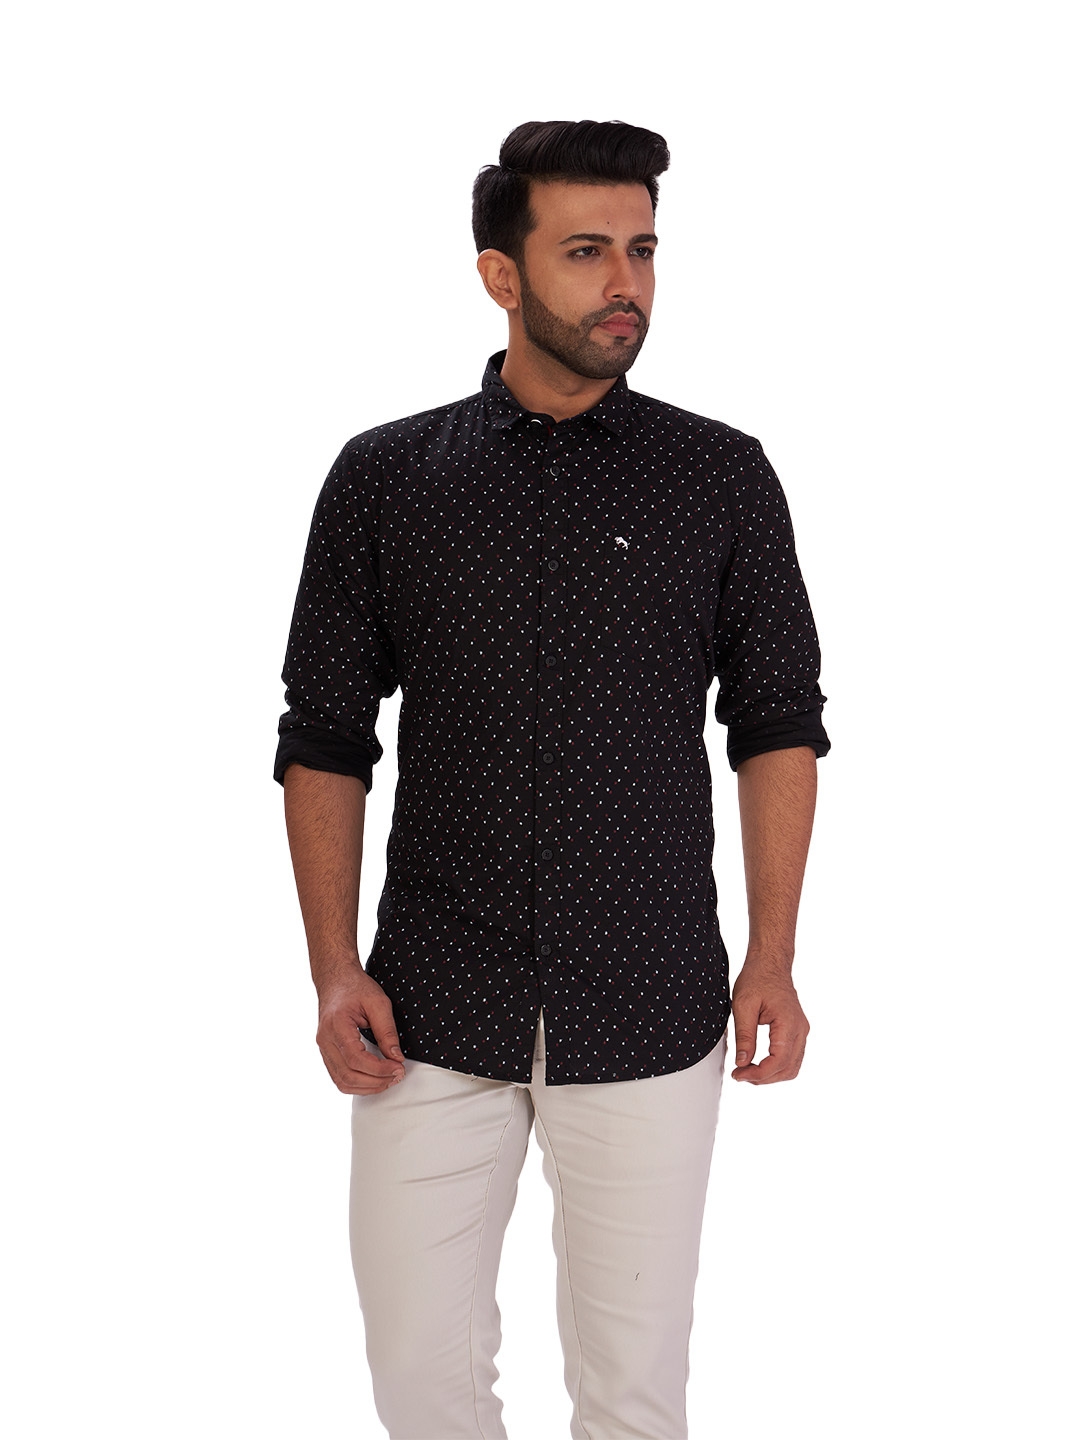 D'cot by Donear | D'cot by Donear Men's Black Cotton Casual Shirts